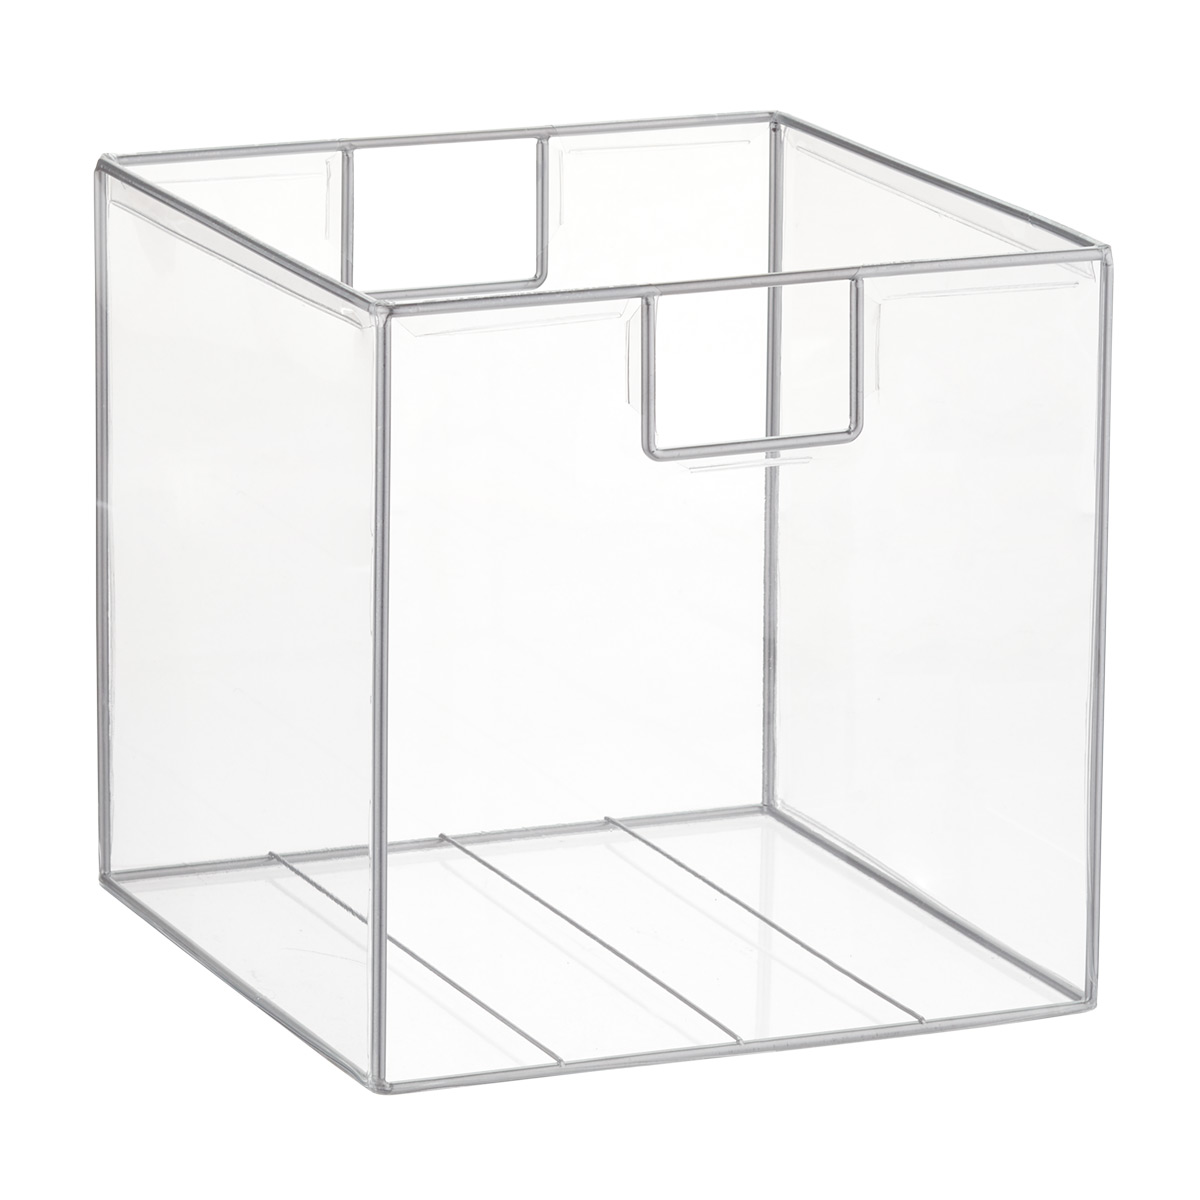 https://images.containerstore.com/catalogimages/341097/10074111-lookers-cube-large.jpg